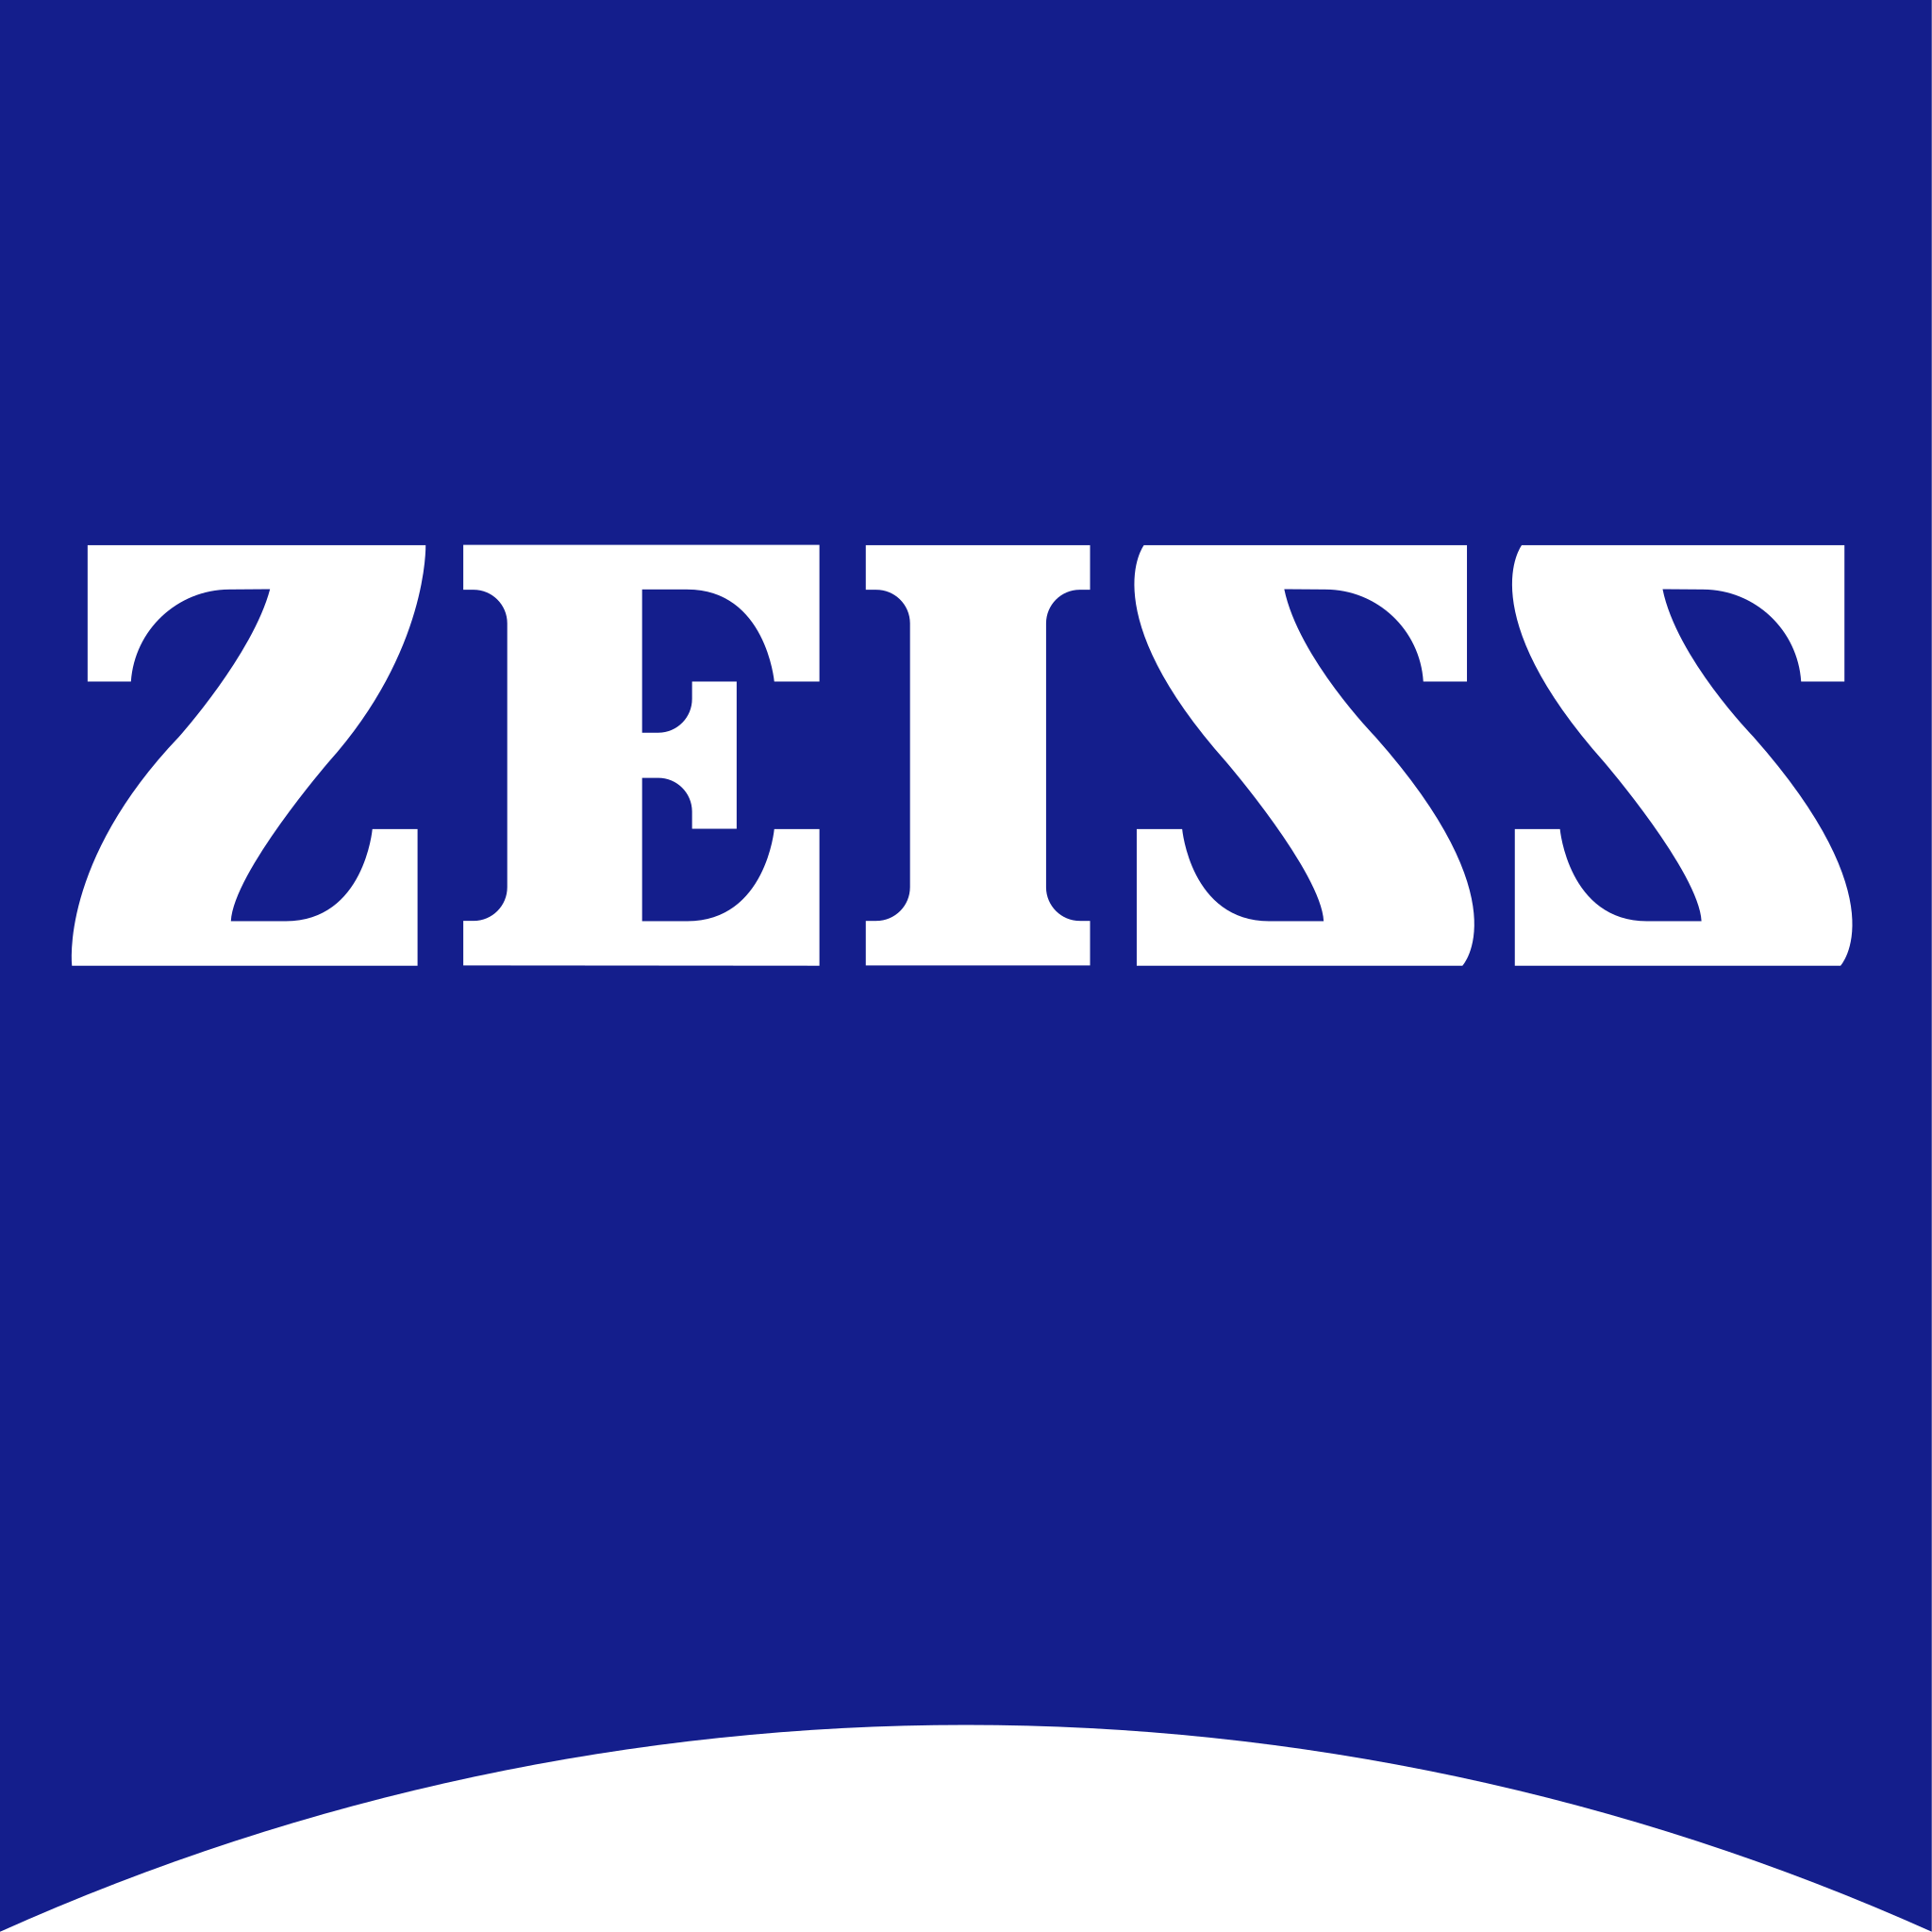 https://cdn.prosystem.live/images/OPSIS_Vision_Care_Limited/Zeiss_logo-svgffe5770f-7c53-460b-baea-54afaac89870.png